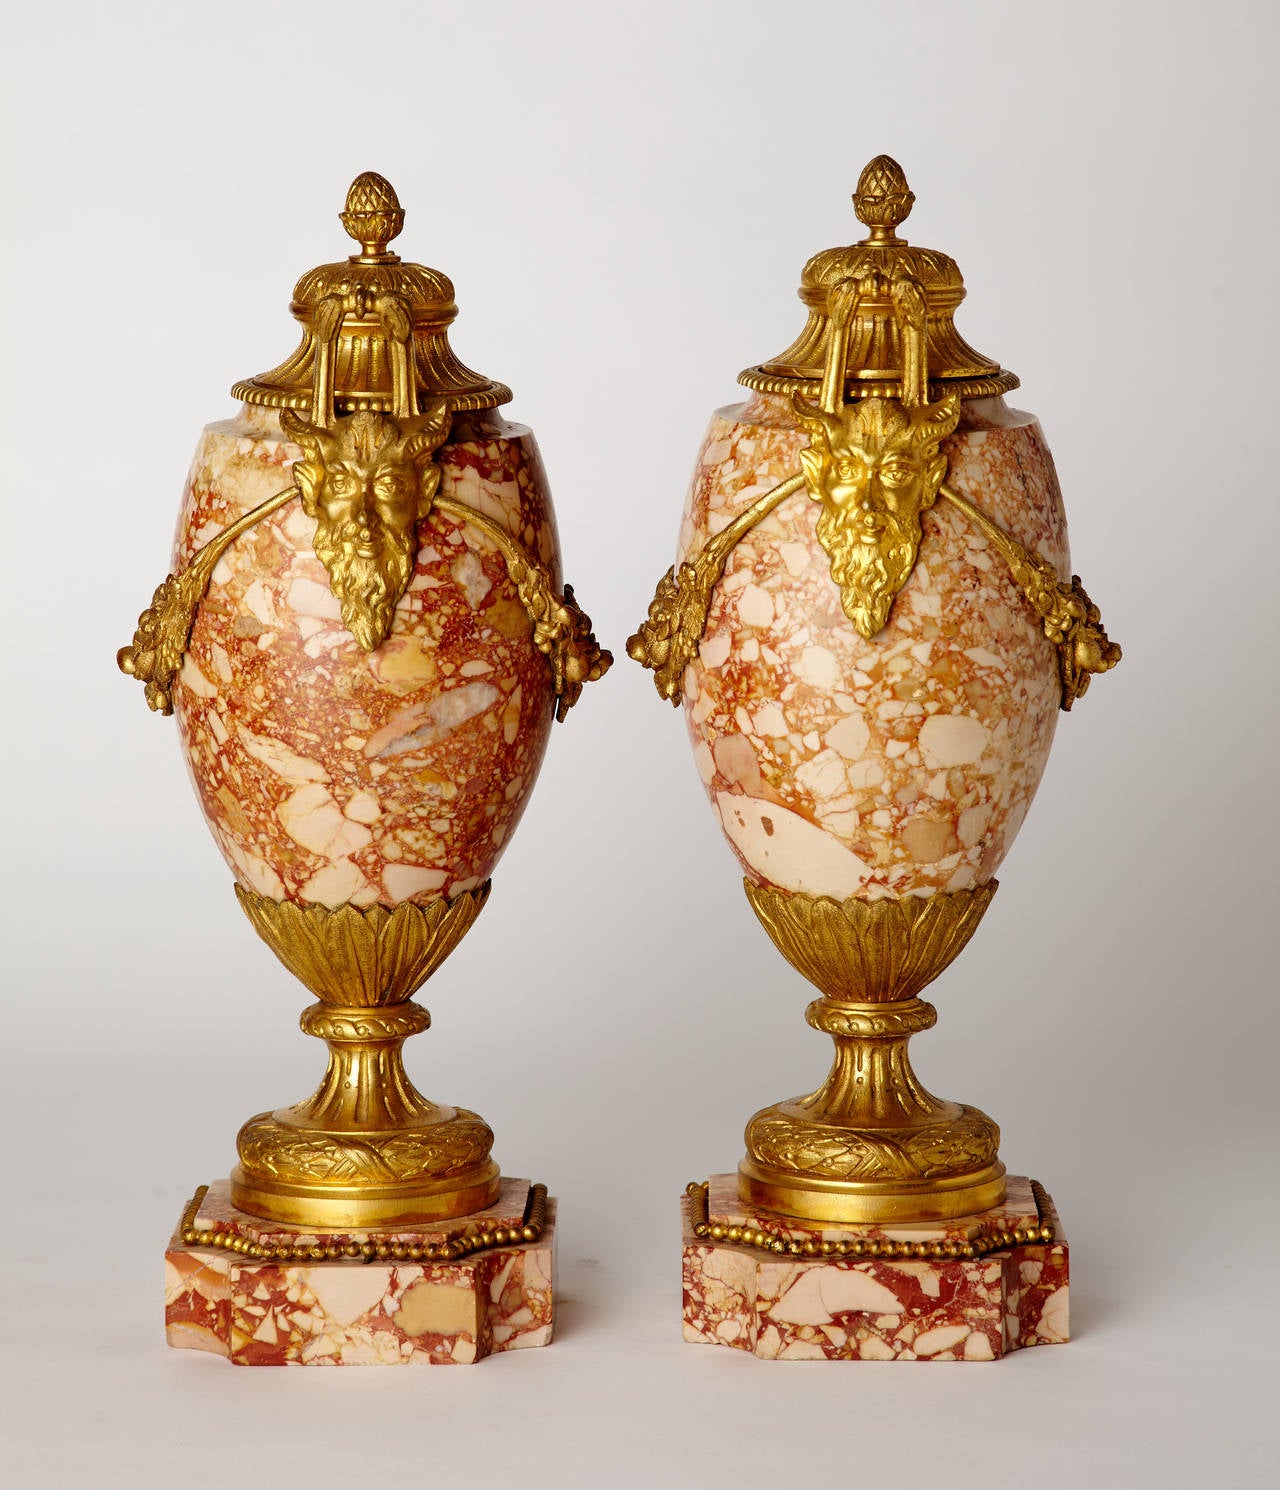 Pair of circa 1900 French Louis XVI style marble vases with finely worked gilt bronze mounts. Gilt bronze swags terminate in handles anchored by satyr masks. Removable gilt bronze lids.